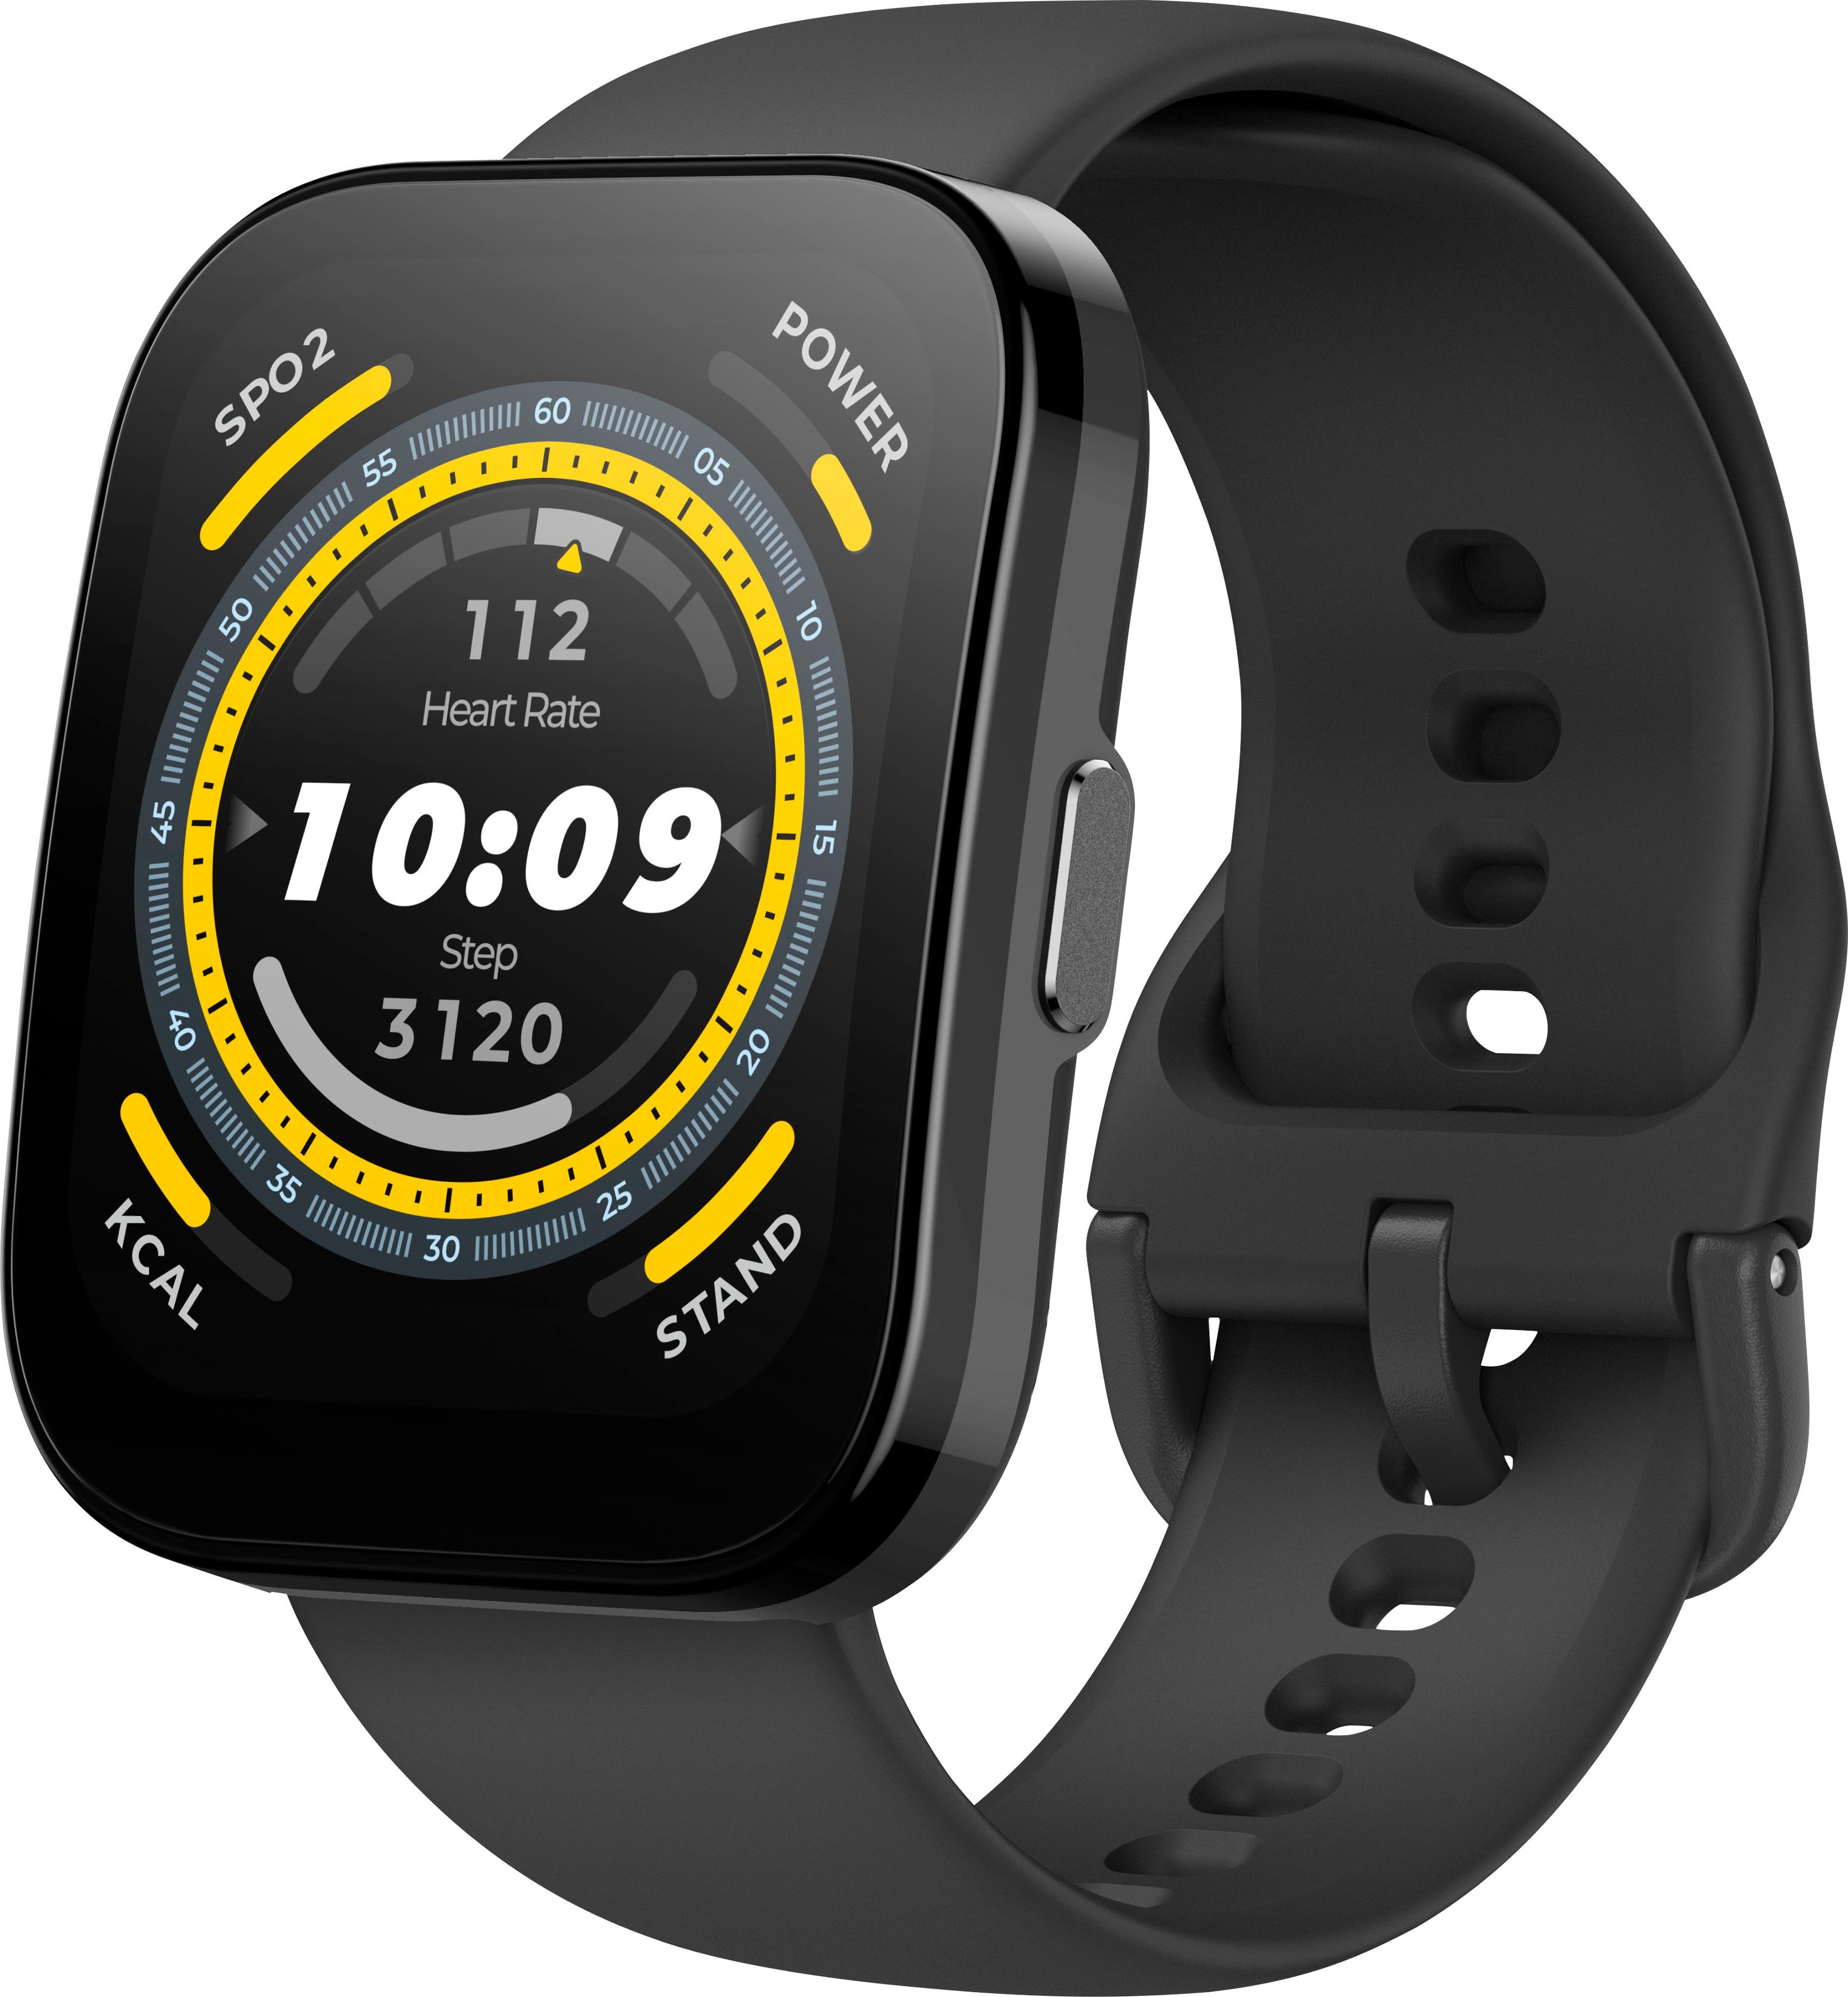 Amazfit Balance Price in Nepal, Specifications, Availability